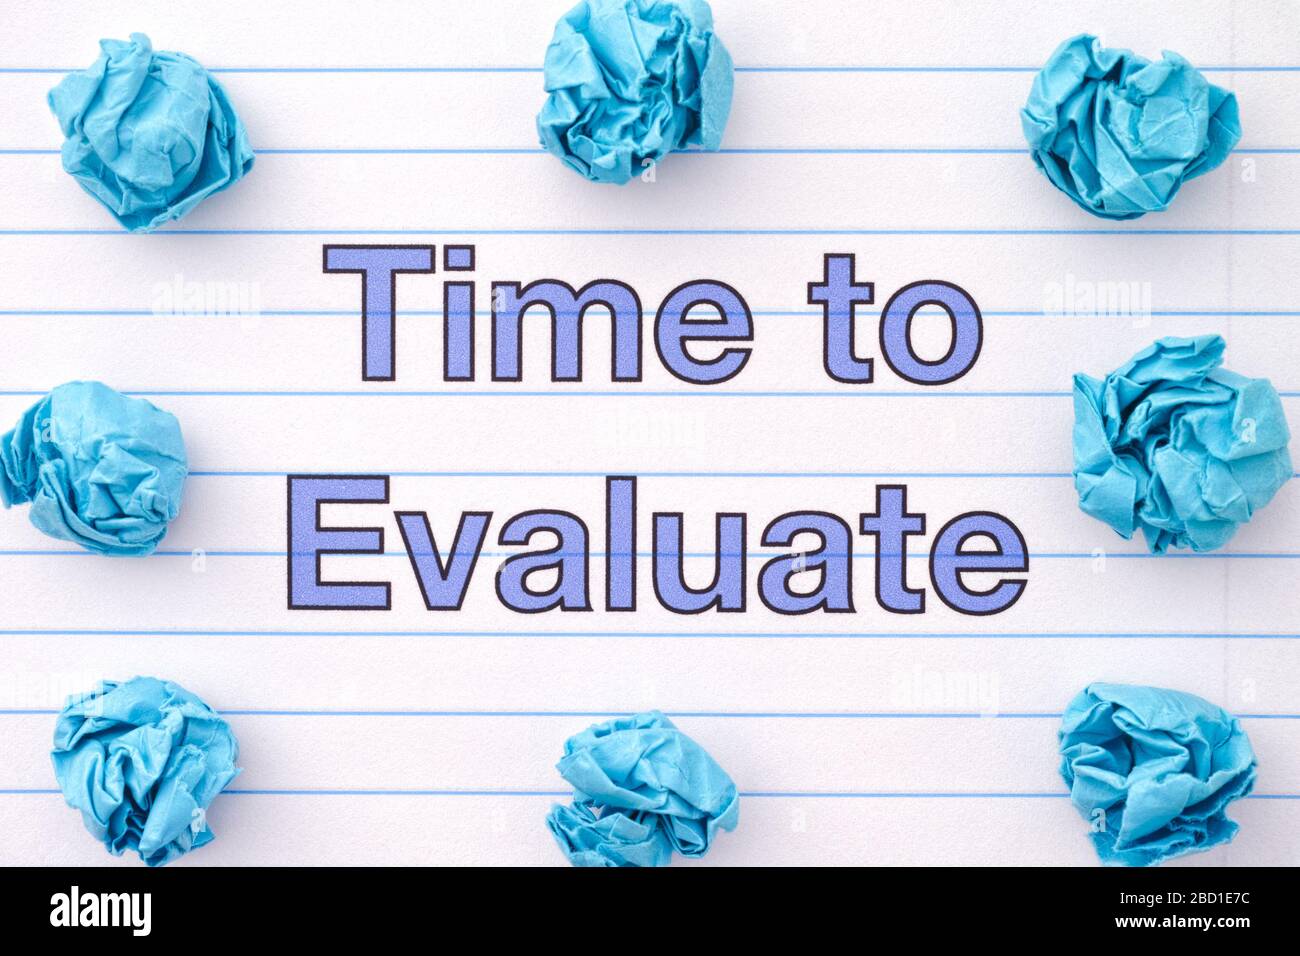 The phrase Time To Evaluate written on a lined notebook sheet with some crumpled paper balls around it. Close up. Stock Photo